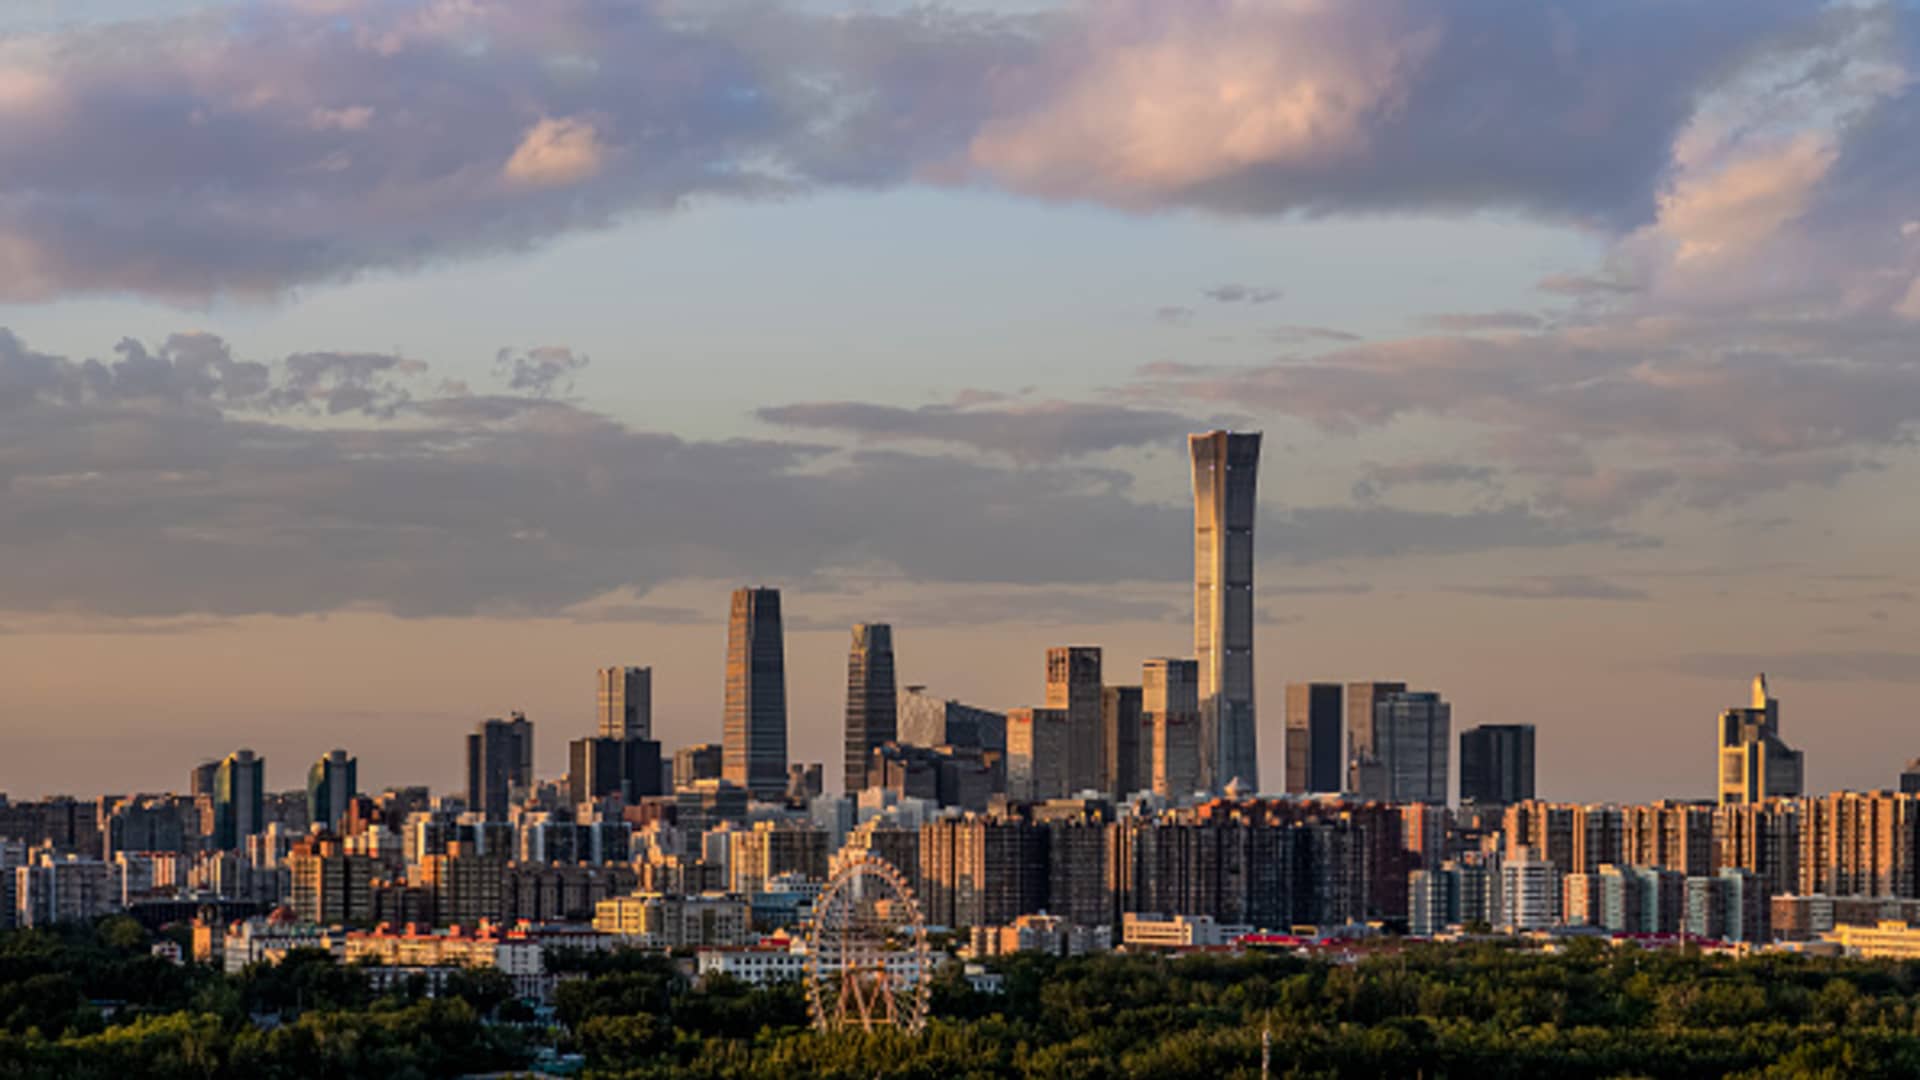 View of the central business district skyline at sunset in Beijing, China.